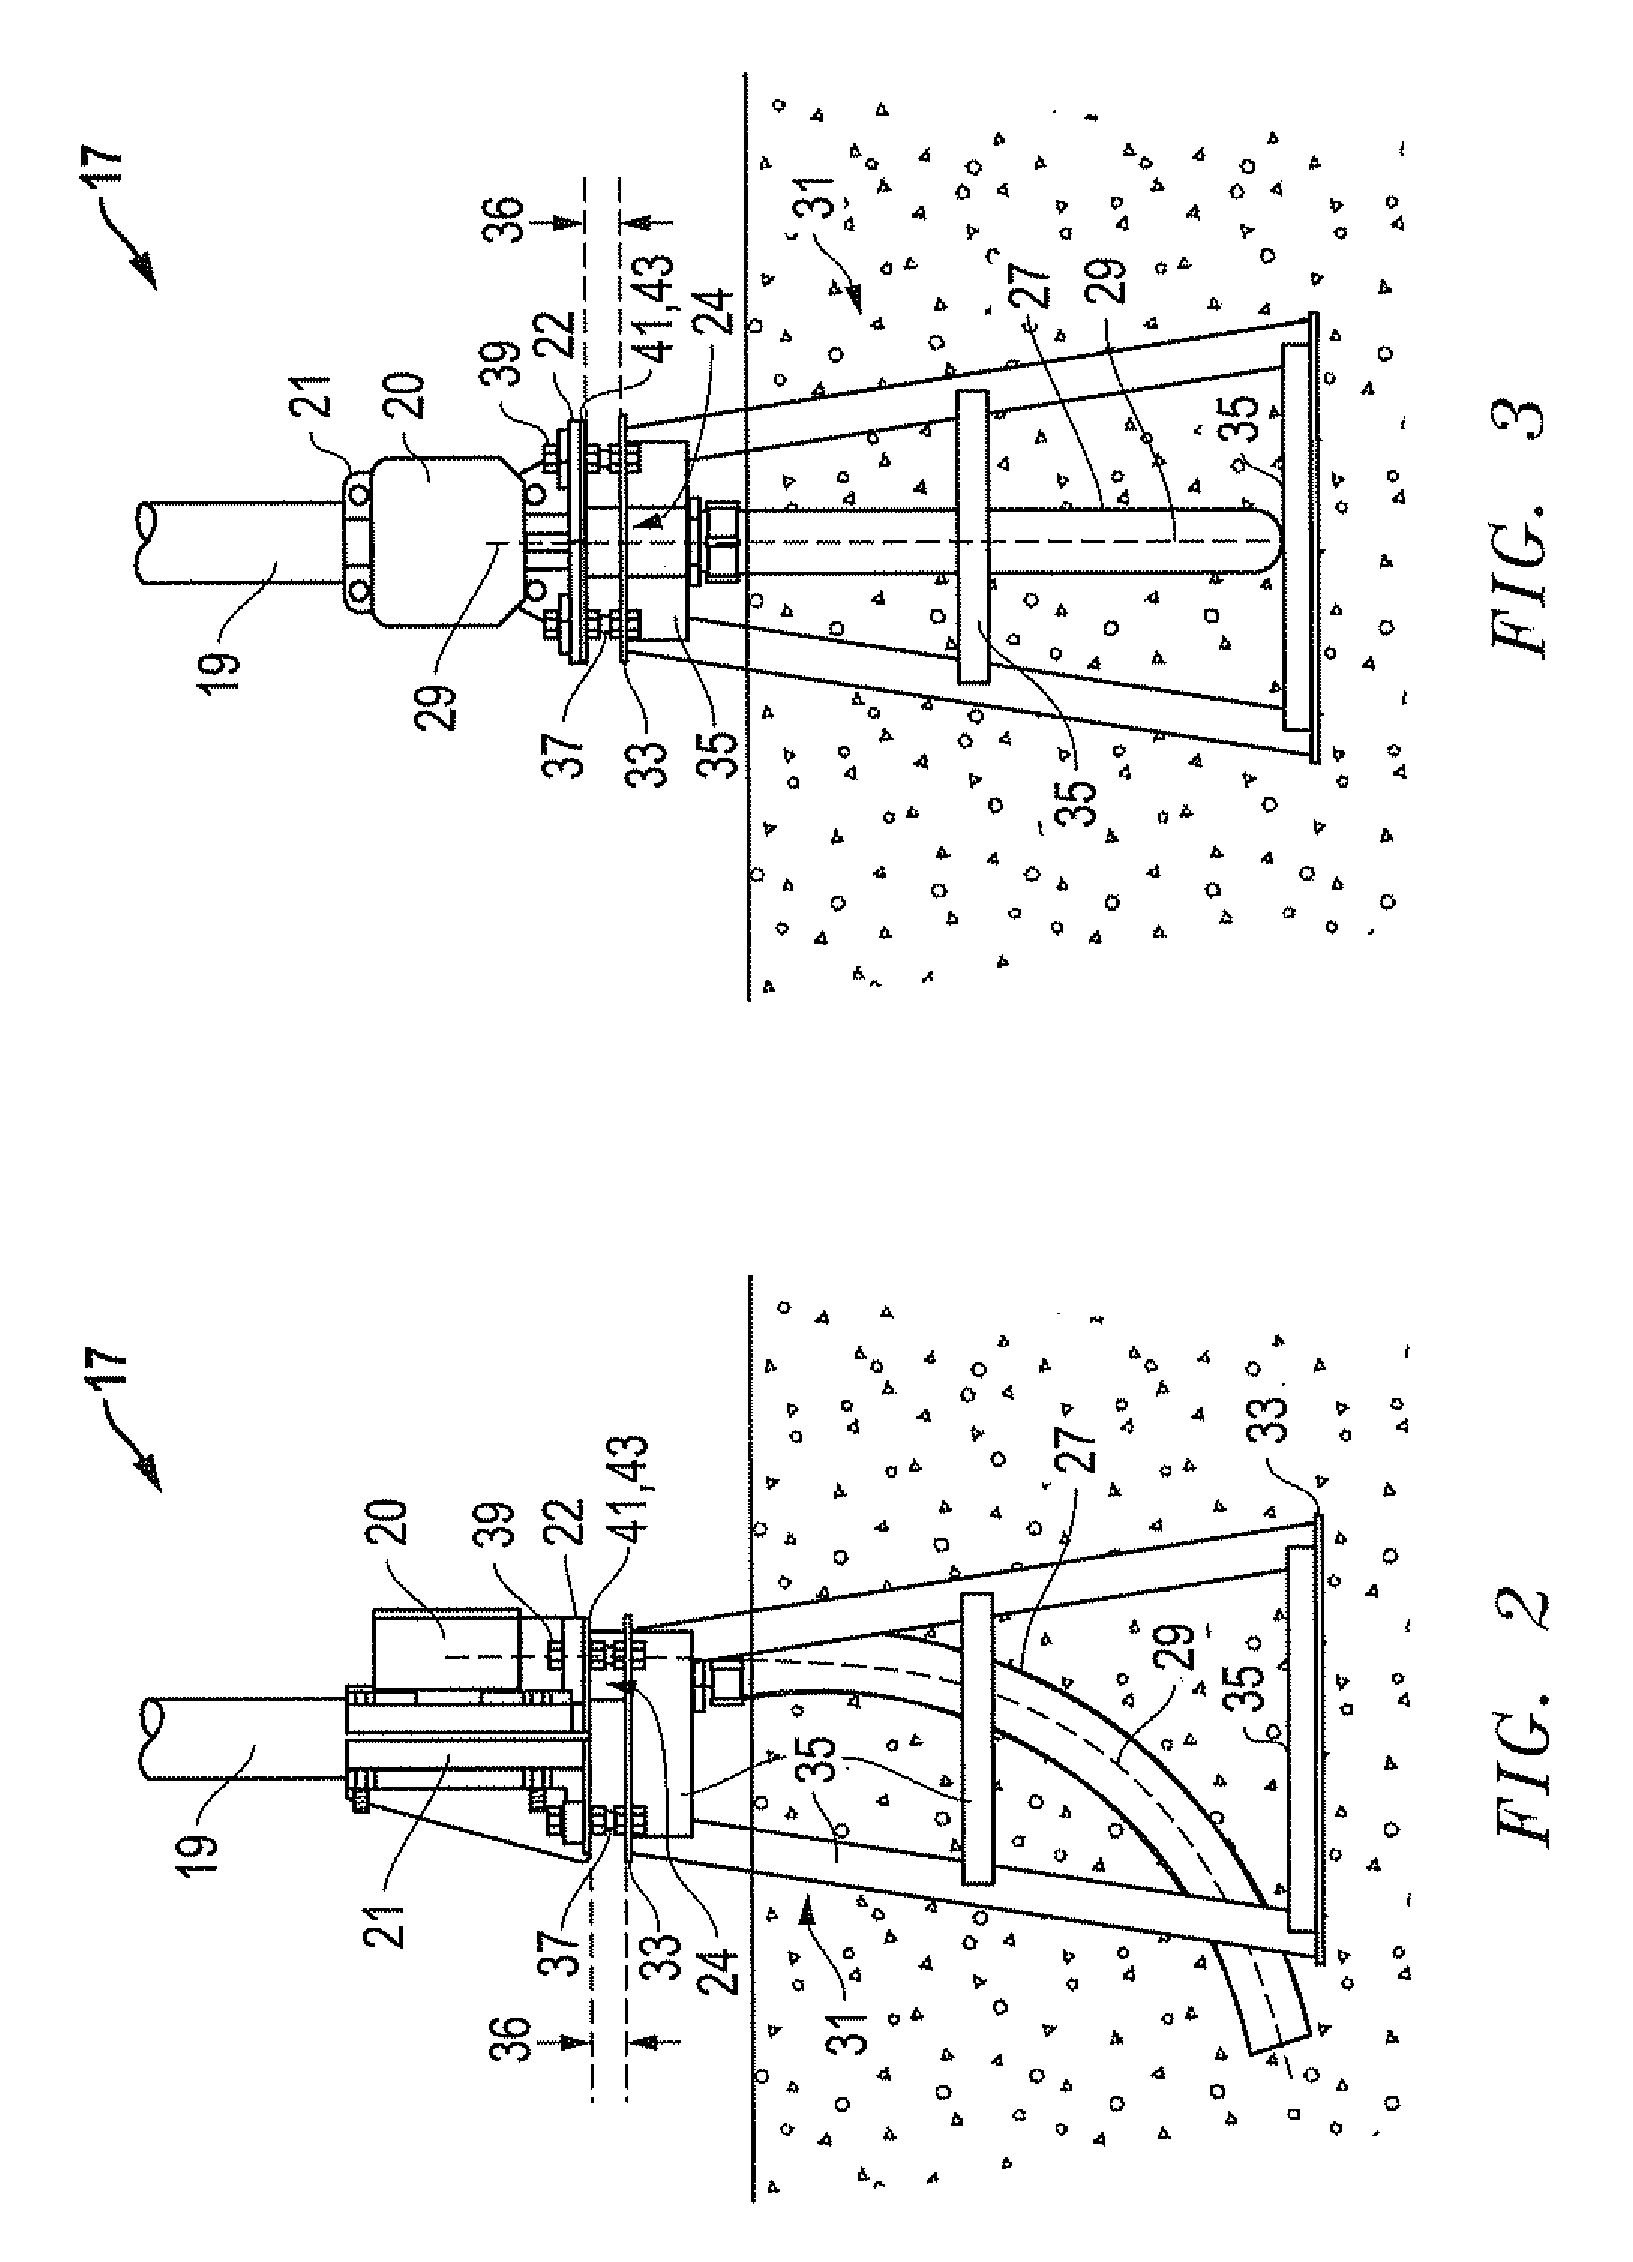 System, method and apparatus for railroad gate flasher assembly having a sealed, rodent-proof connection between in-place foundation and utility mast